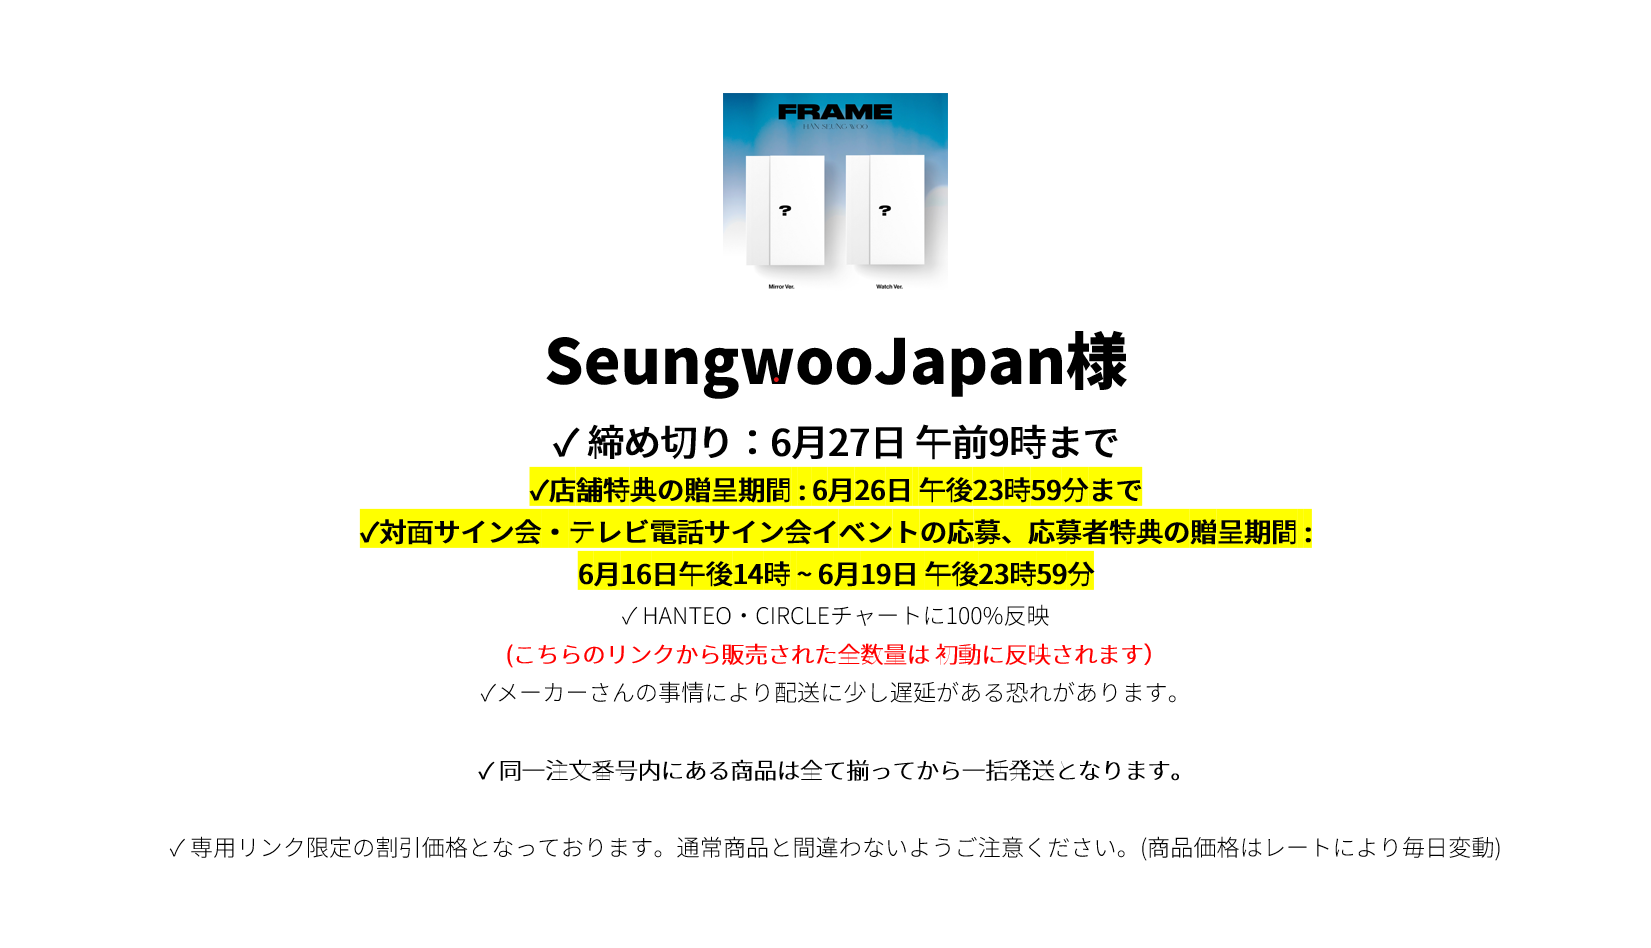 SeungwooJapan様